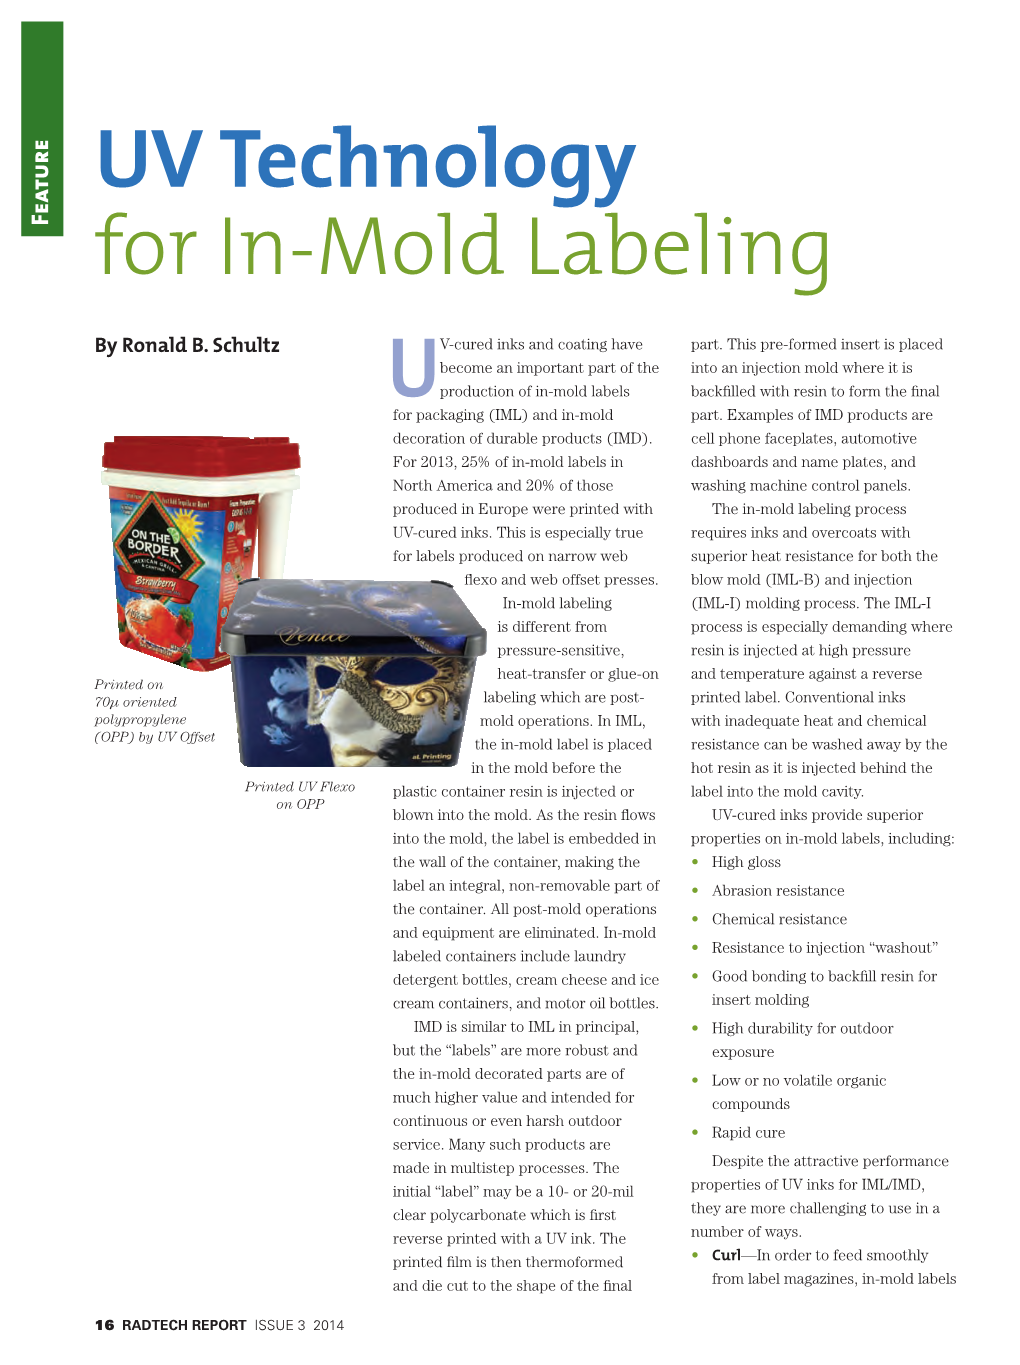 UV Technology for In-Mold Labeling